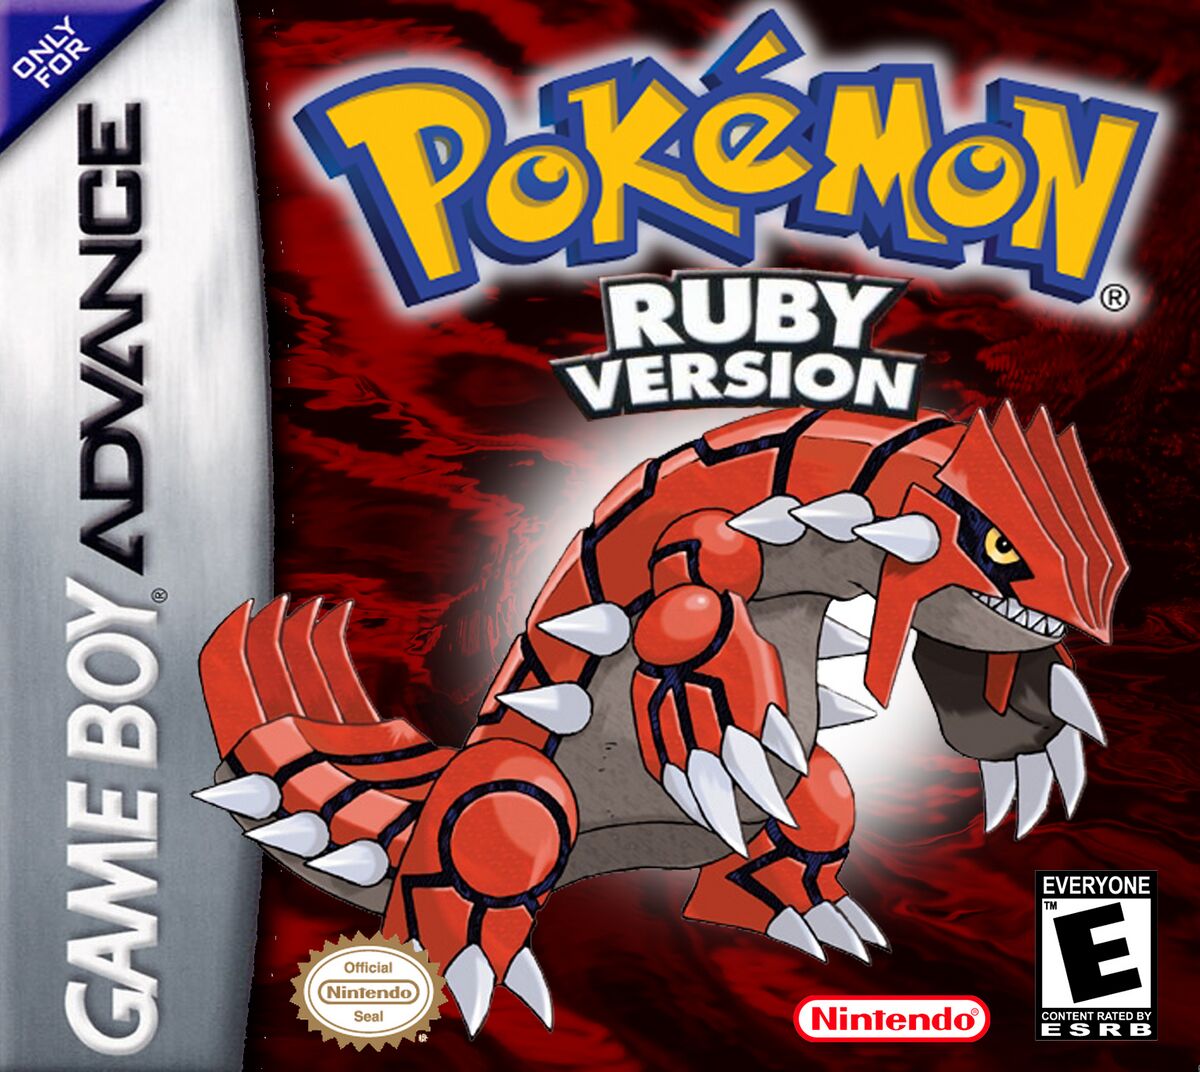 Pokémon Ruby Sapphire — StrategyWiki | Strategy guide and reference wiki